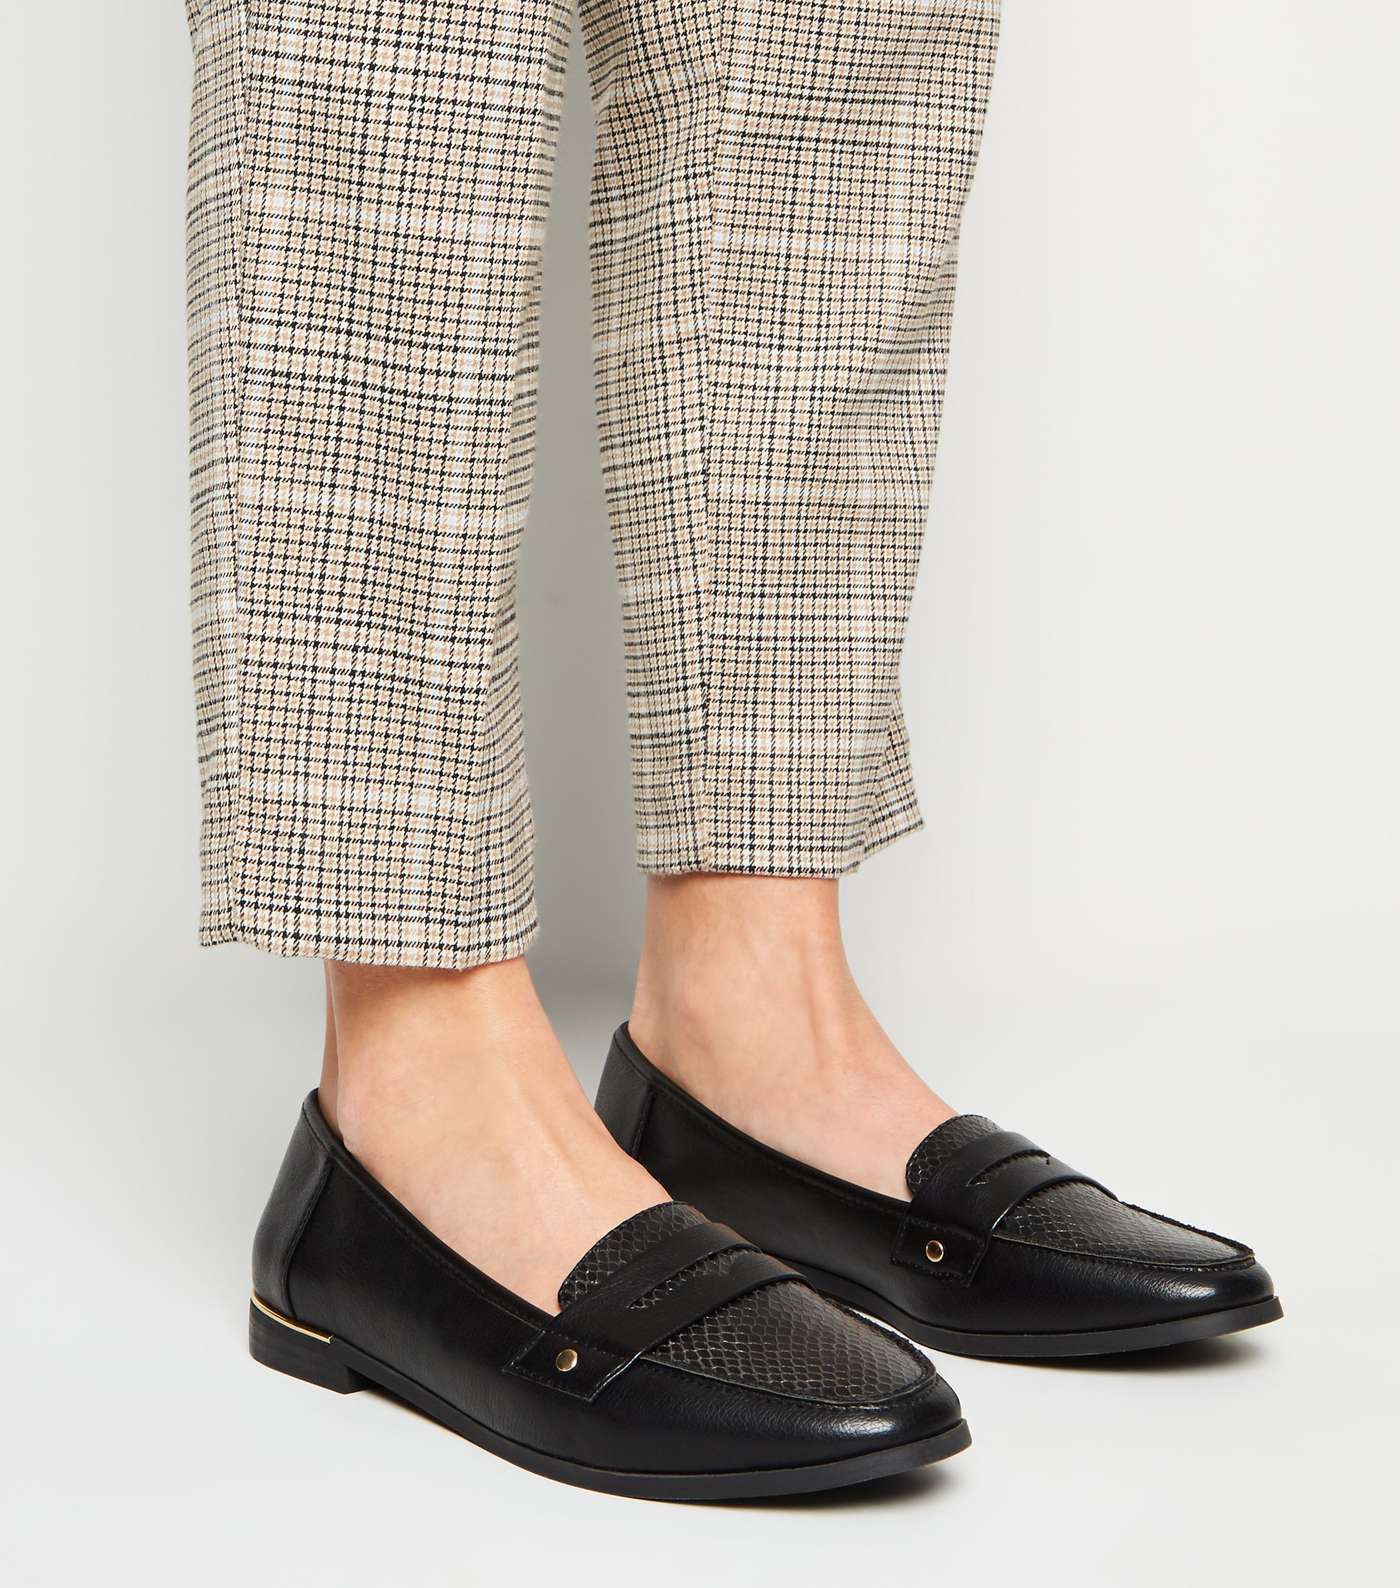 Black Leather-Look Faux Snake Loafers Image 2